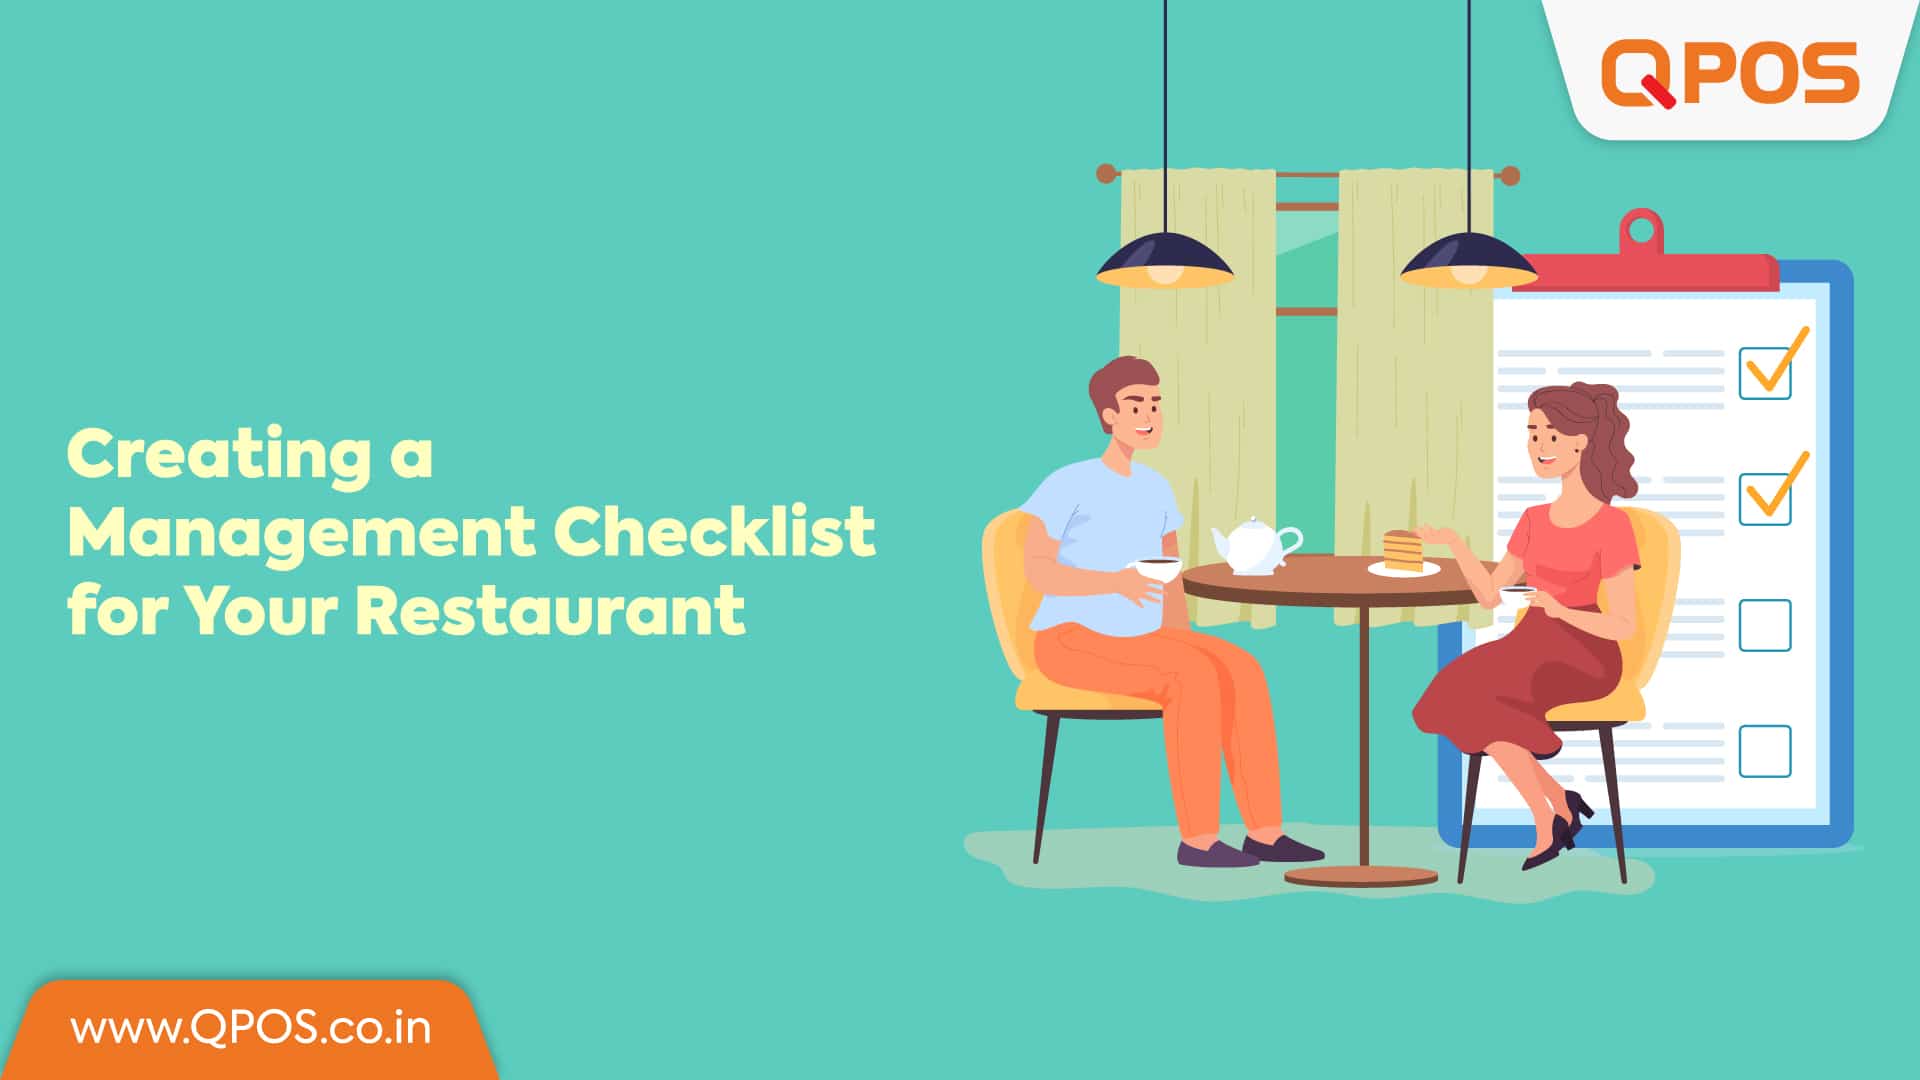 Creating a Management Checklist for Your Restaurant